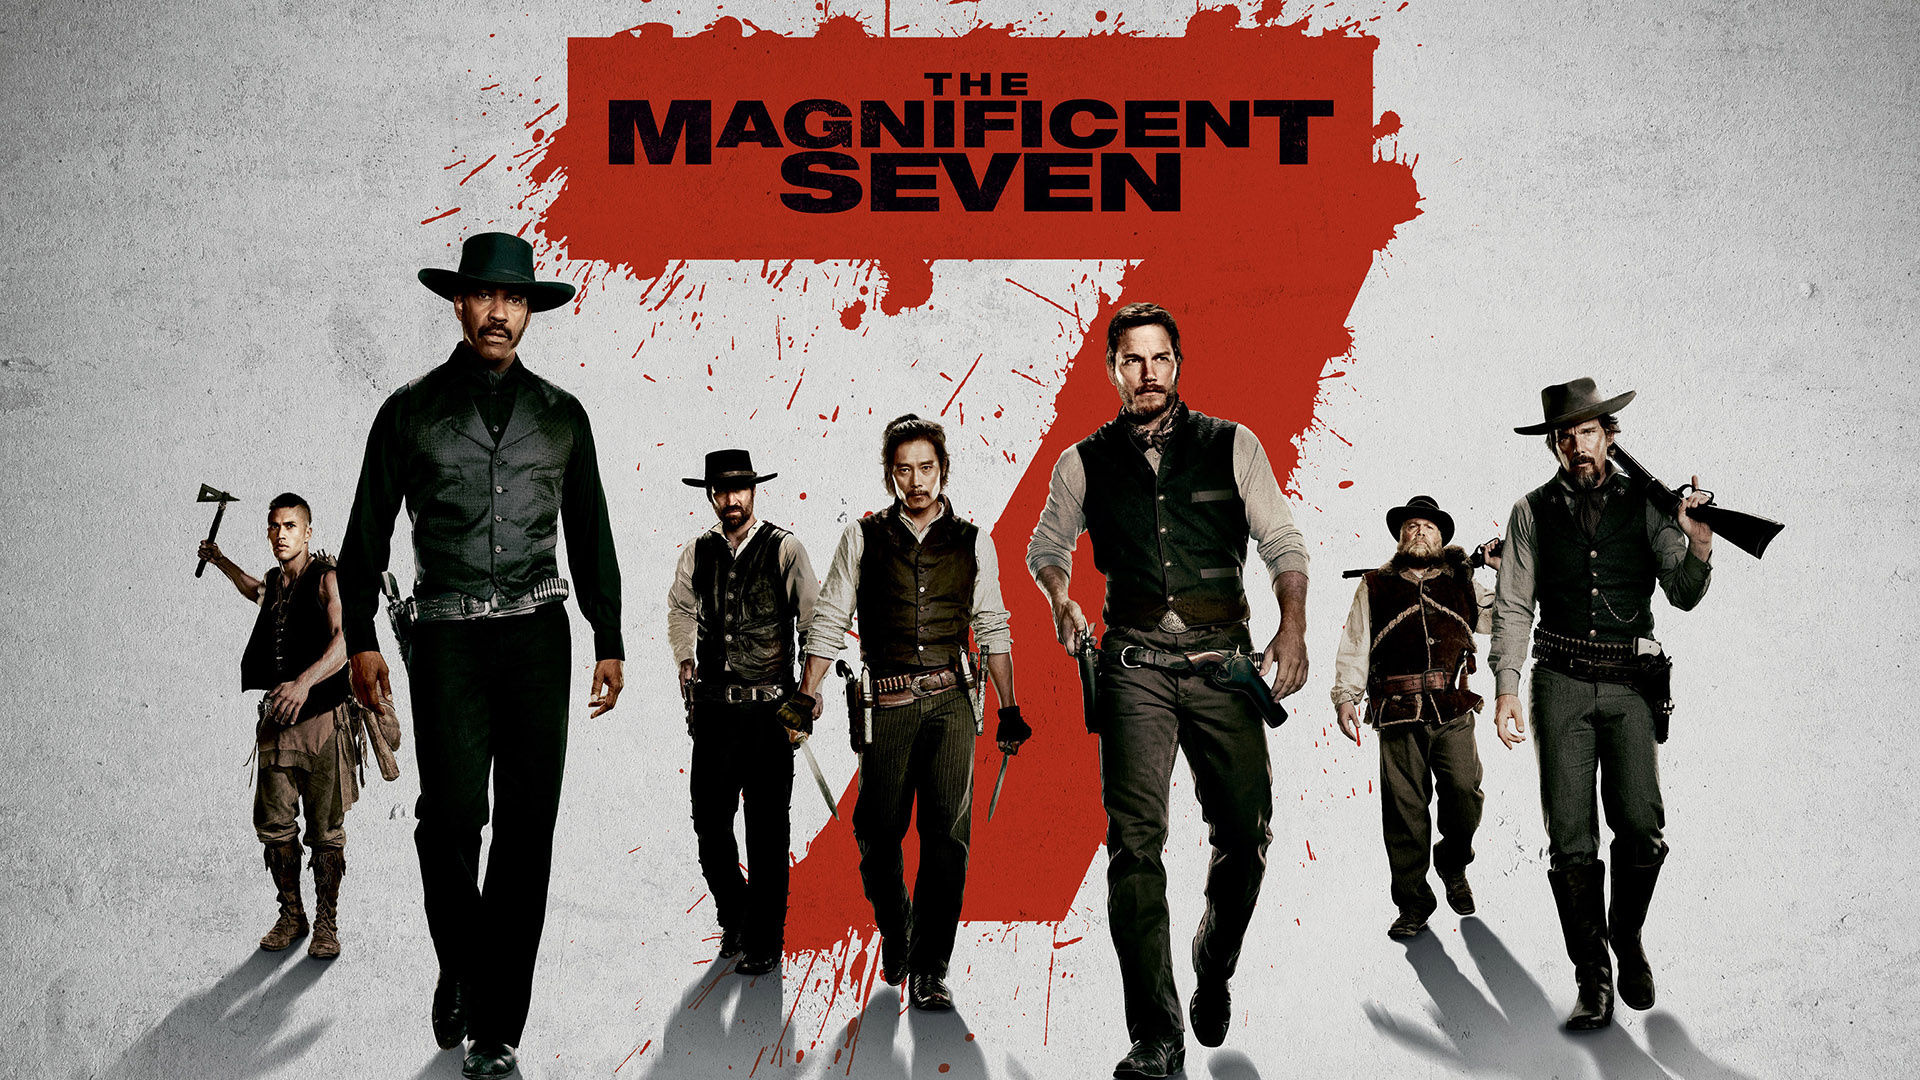 The Magnificent Seven, Drinking game, 2016, 1920x1080 Full HD Desktop